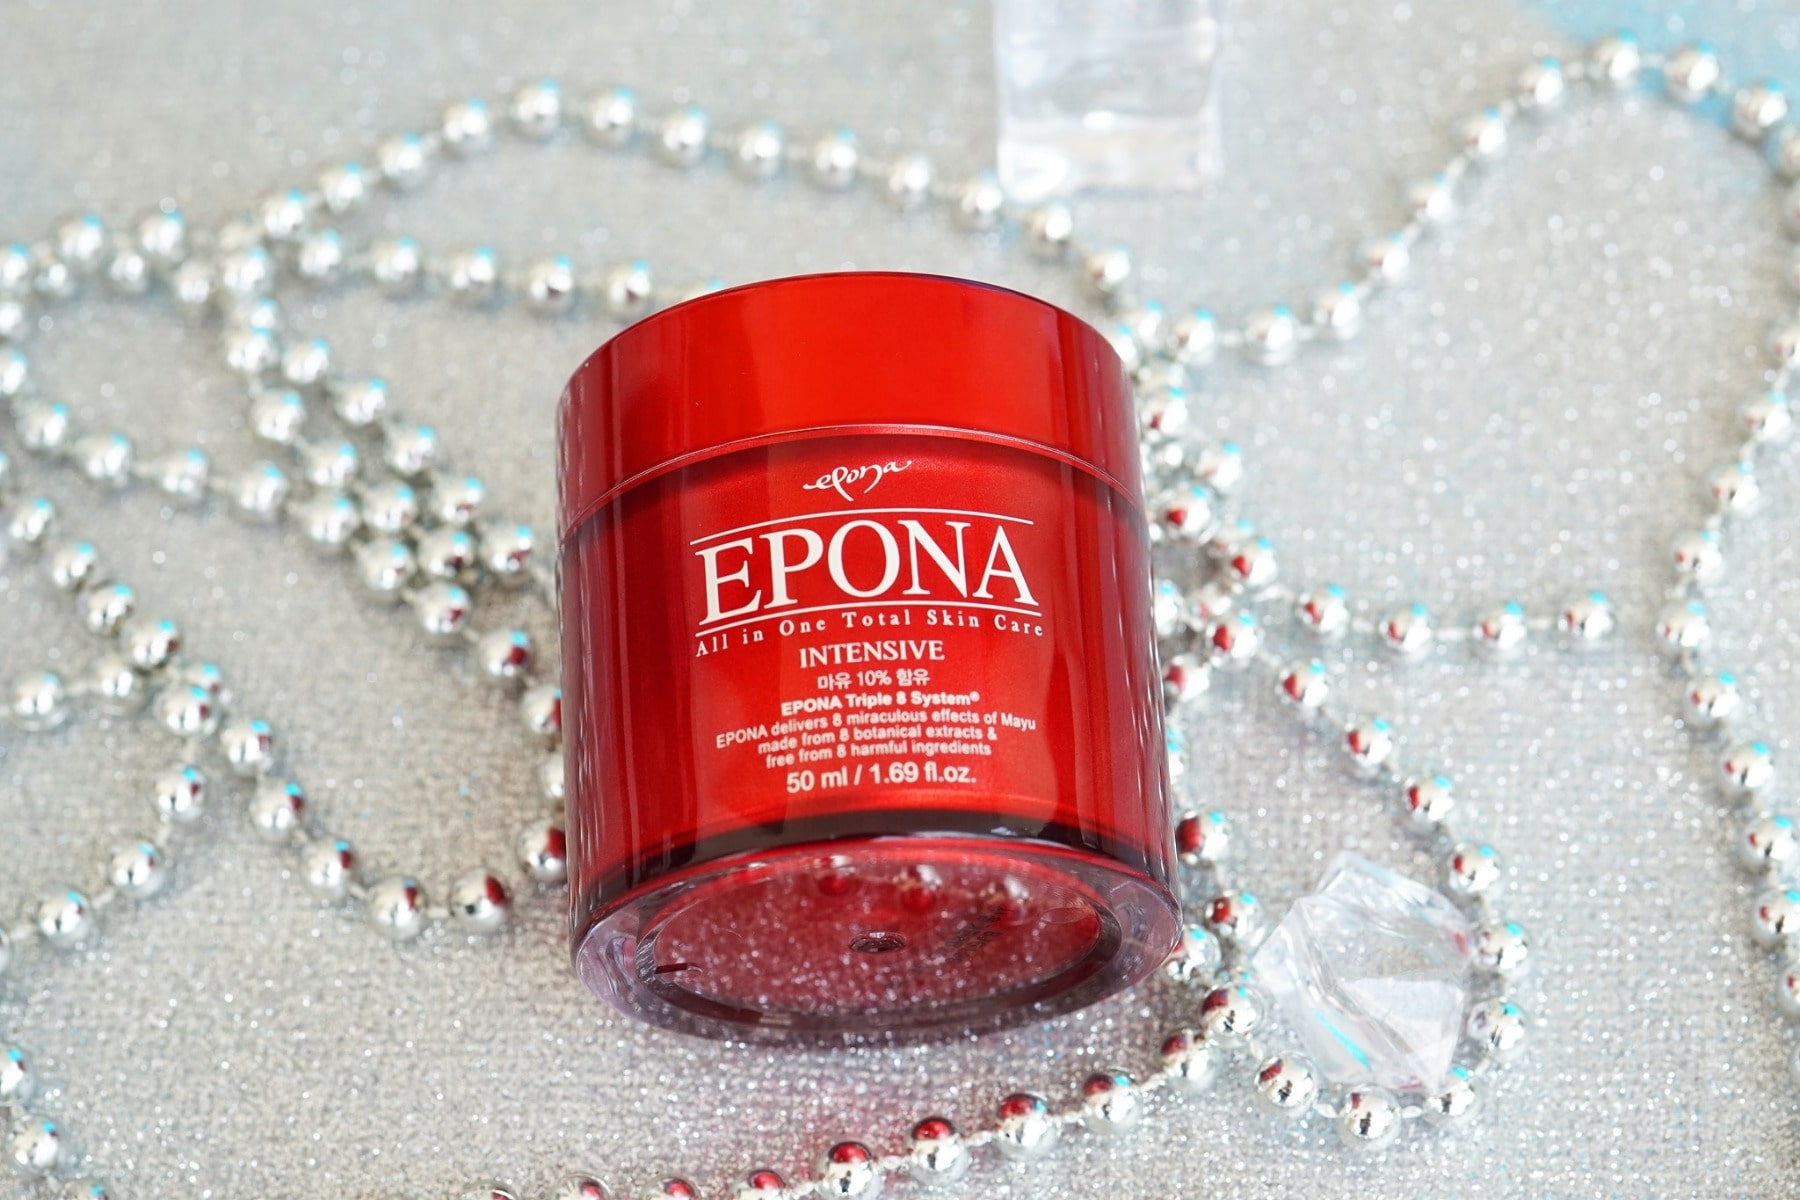 Epona Horse Oil All-In-One lotion is a moisturizer for face which is  smooth white cream like glutinous rice, absorbed very quickly, helping to bring nutrients deep into the skin